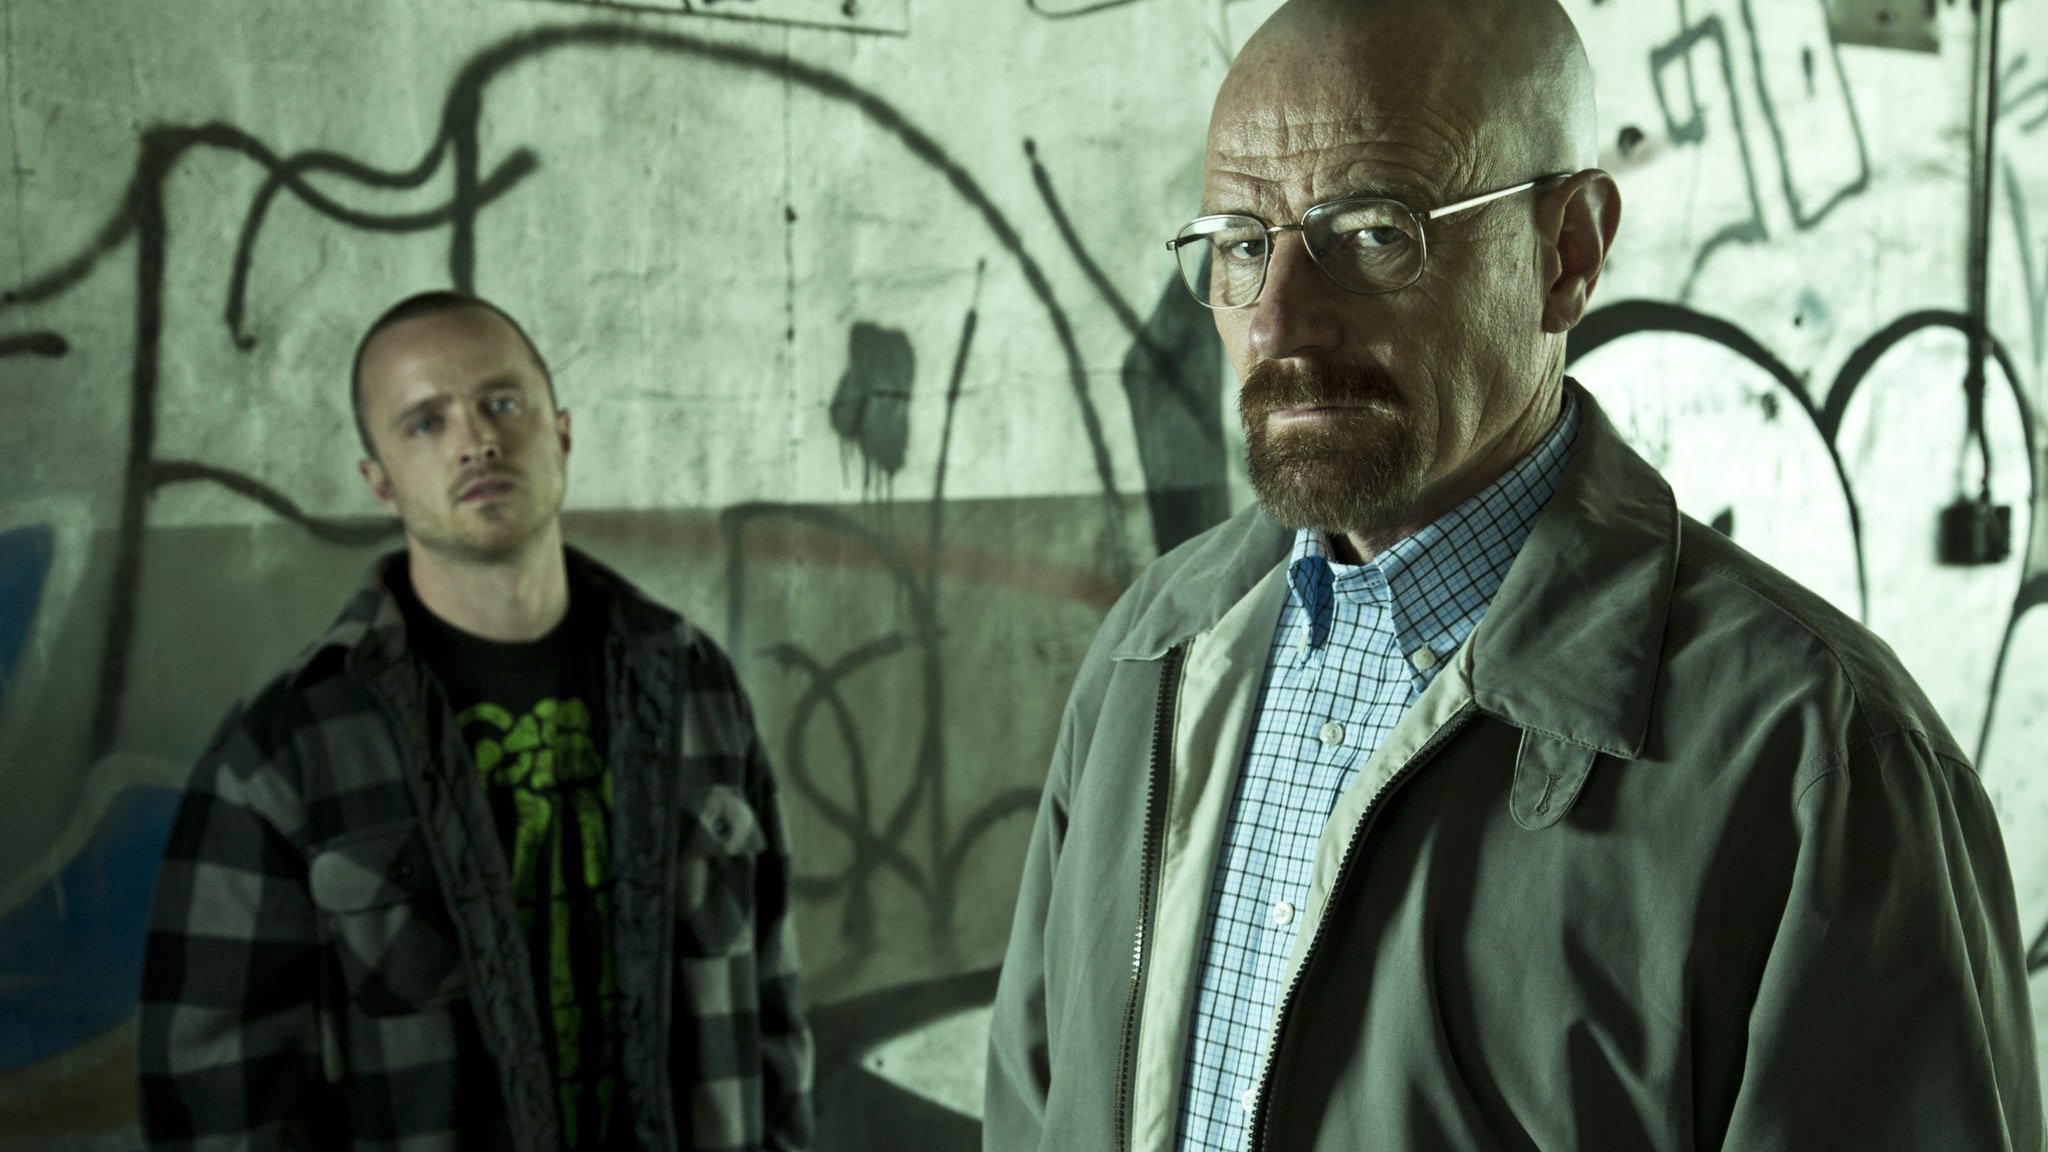 Breaking Bad HD Wallpapers, Pictures, Images